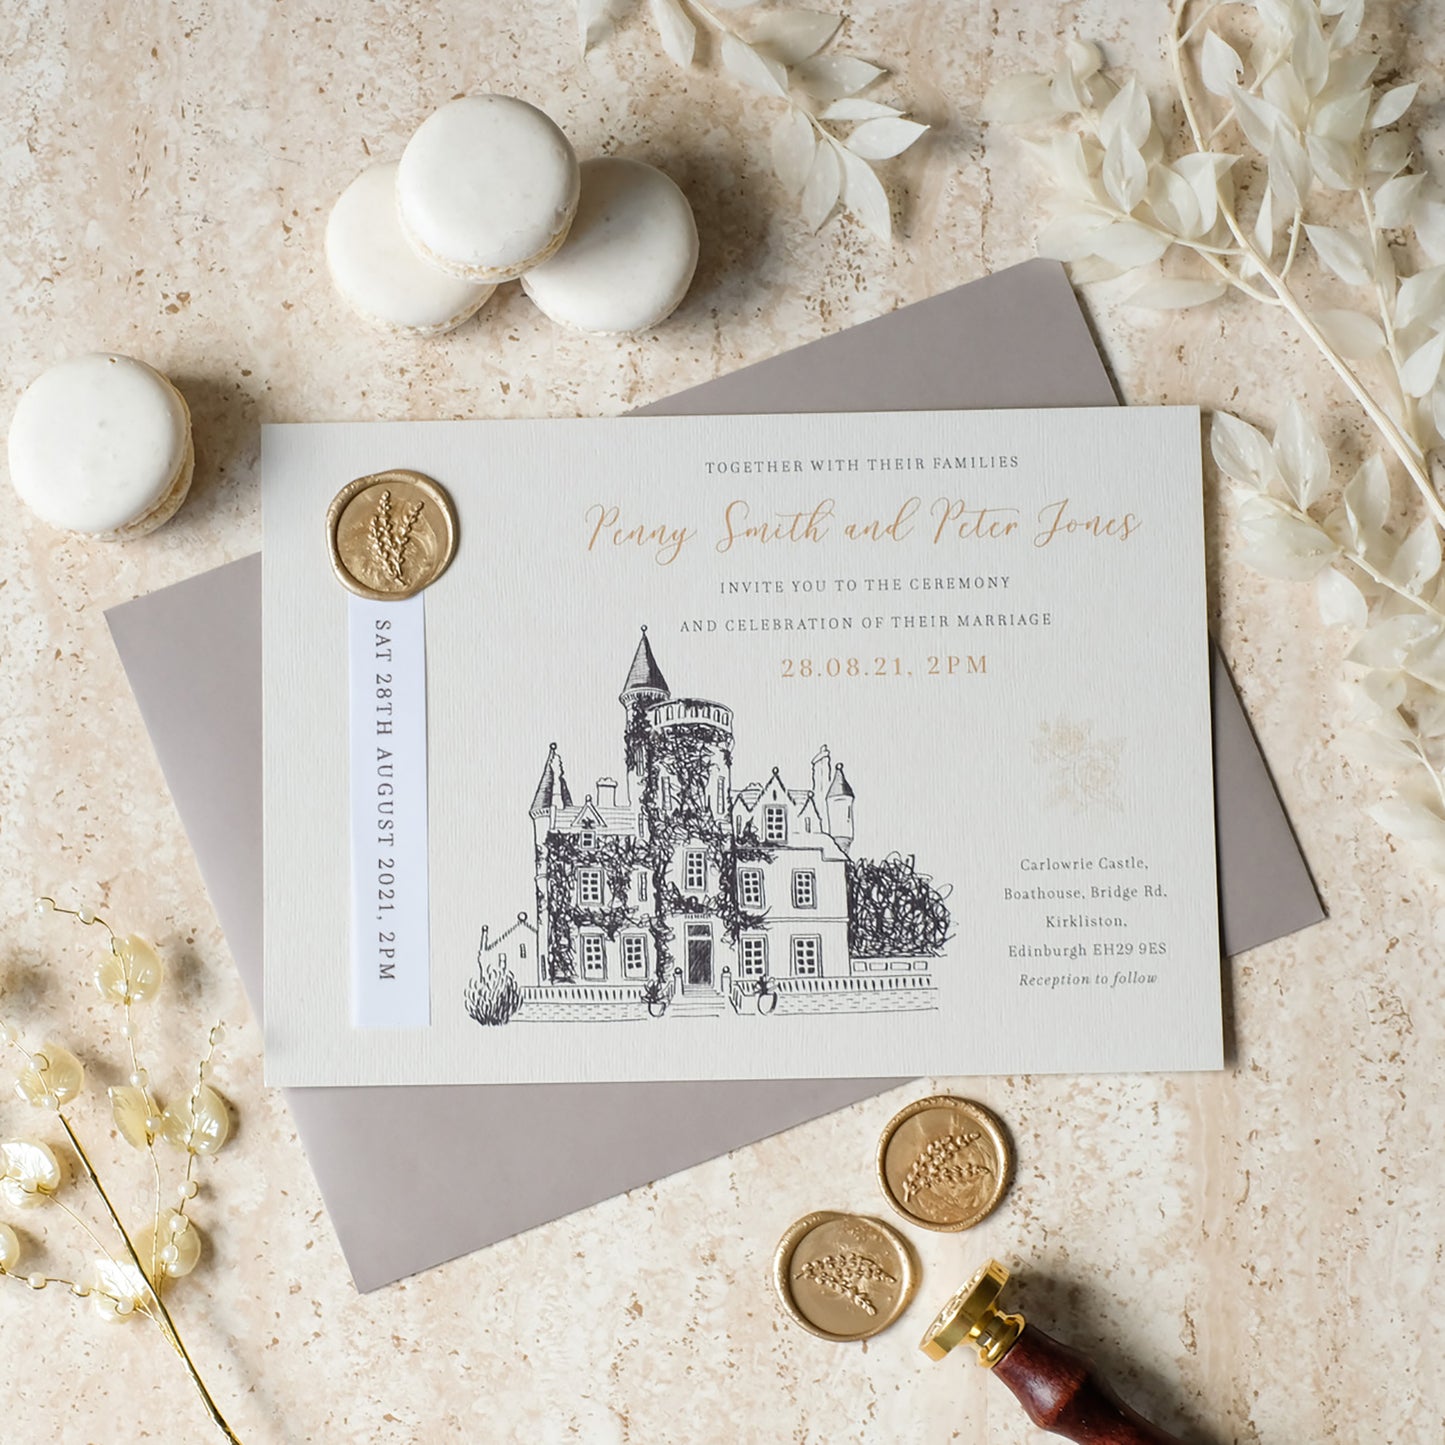 Invitation With Gold Wax Seal And Venue lllustration